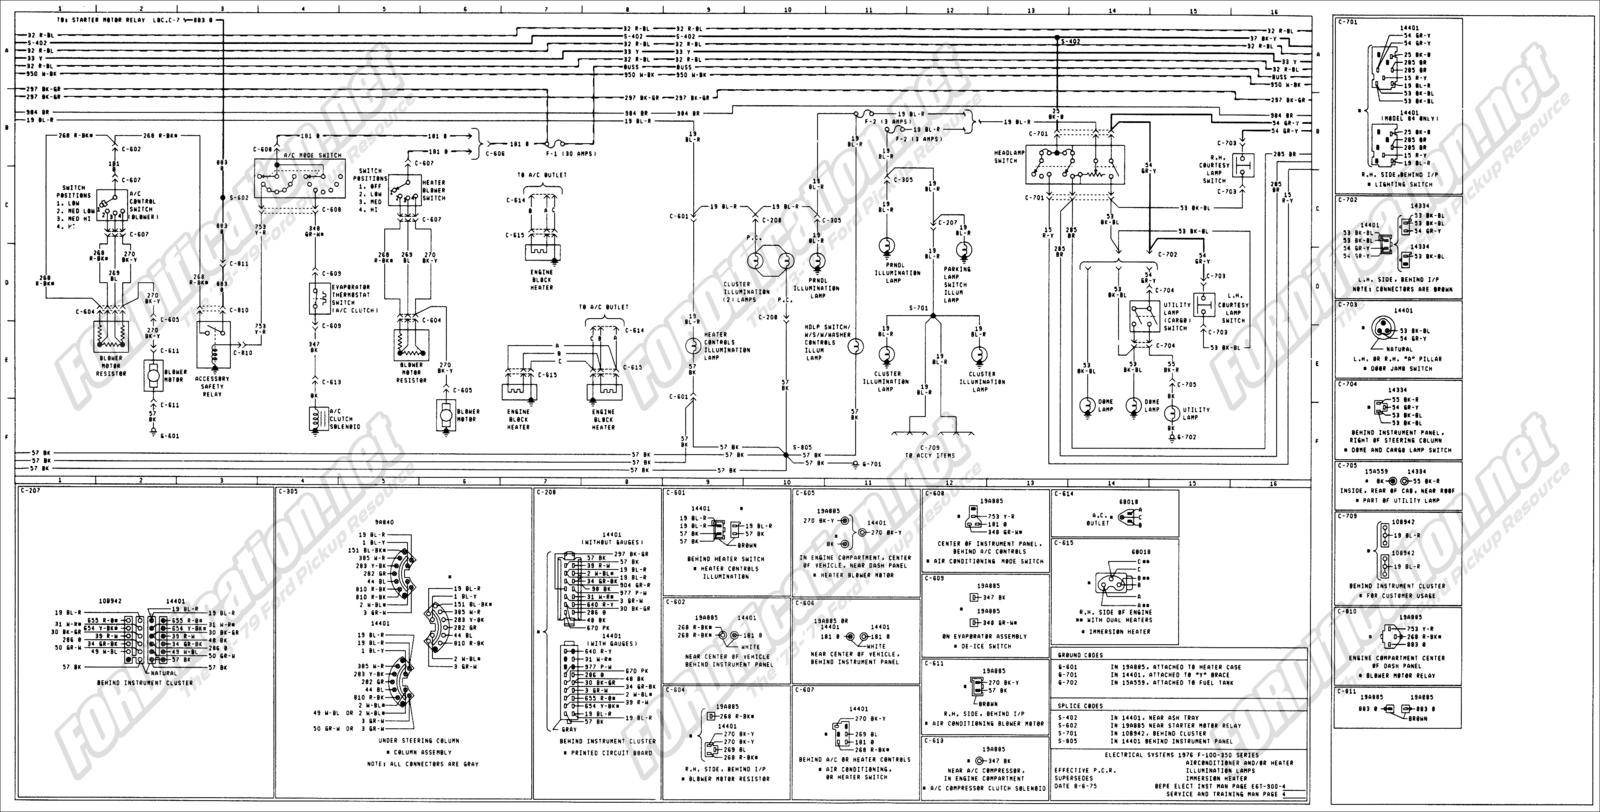 Blower motor wiring questions - Ford Truck Enthusiasts Forums